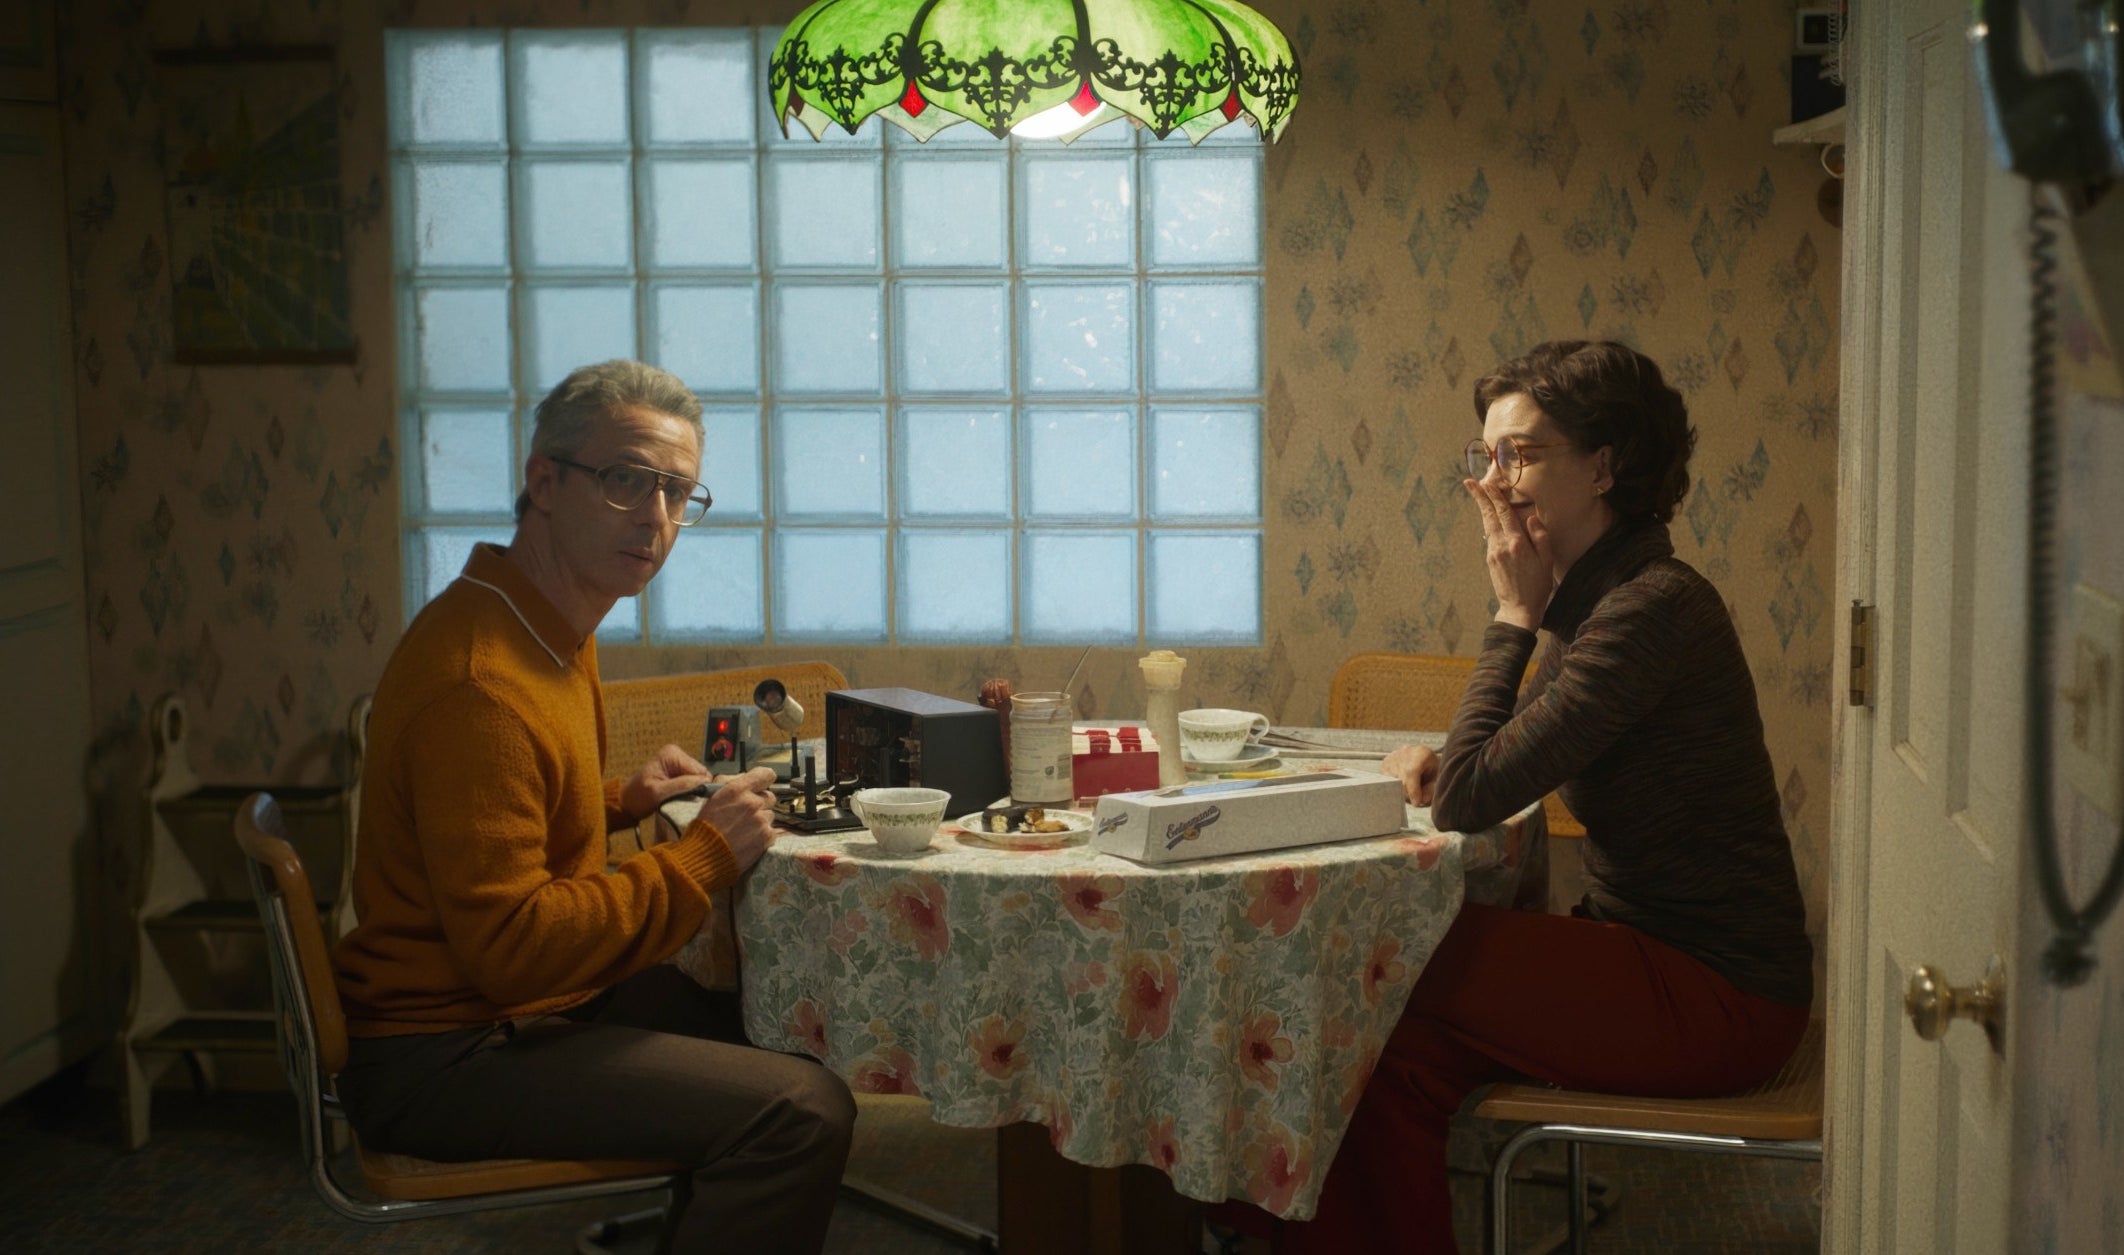 Jeremy Strong and Anne Hathaway sit at a table together